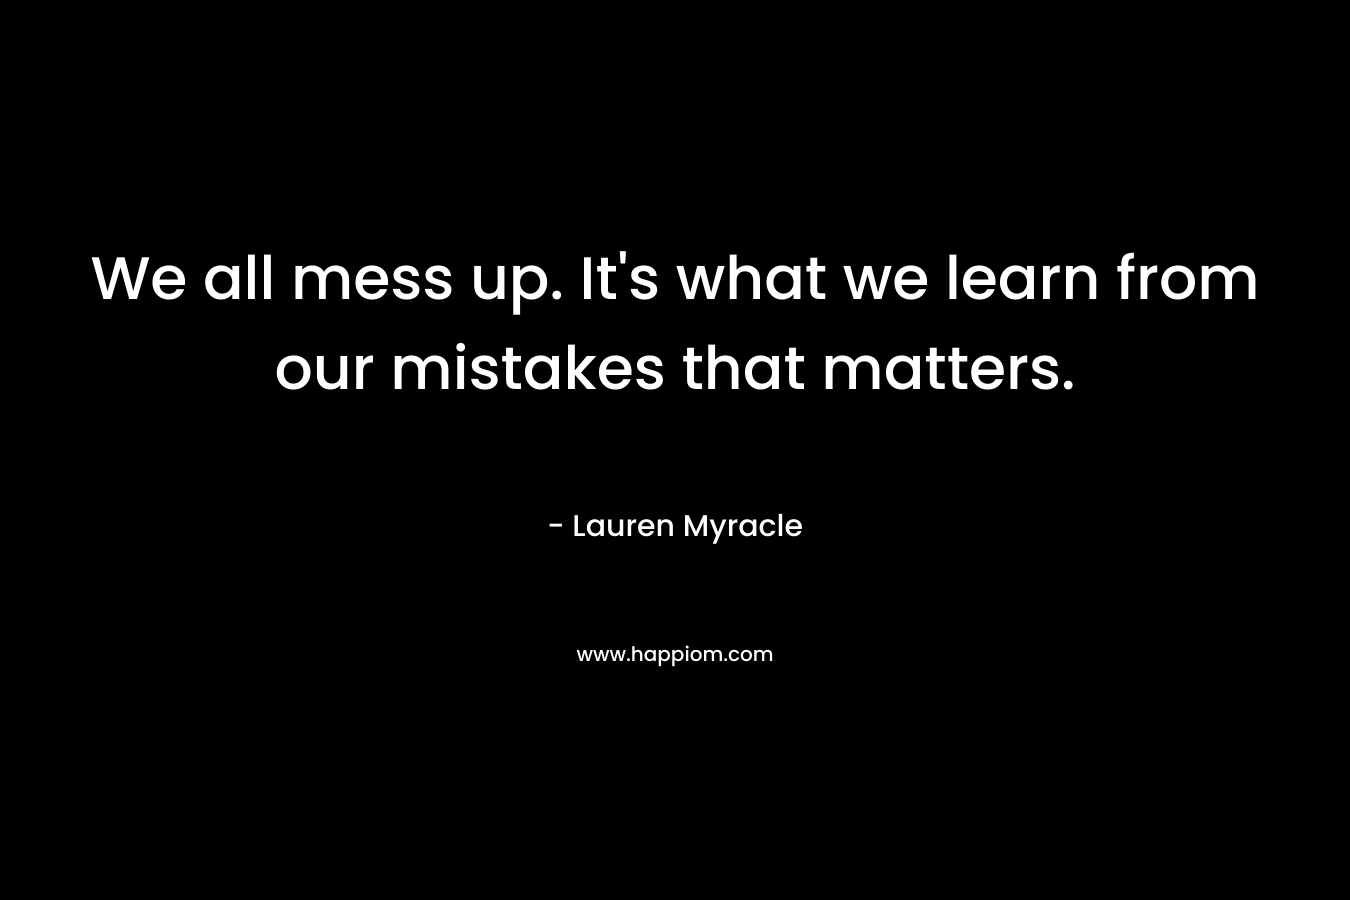 We all mess up. It’s what we learn from our mistakes that matters. – Lauren Myracle